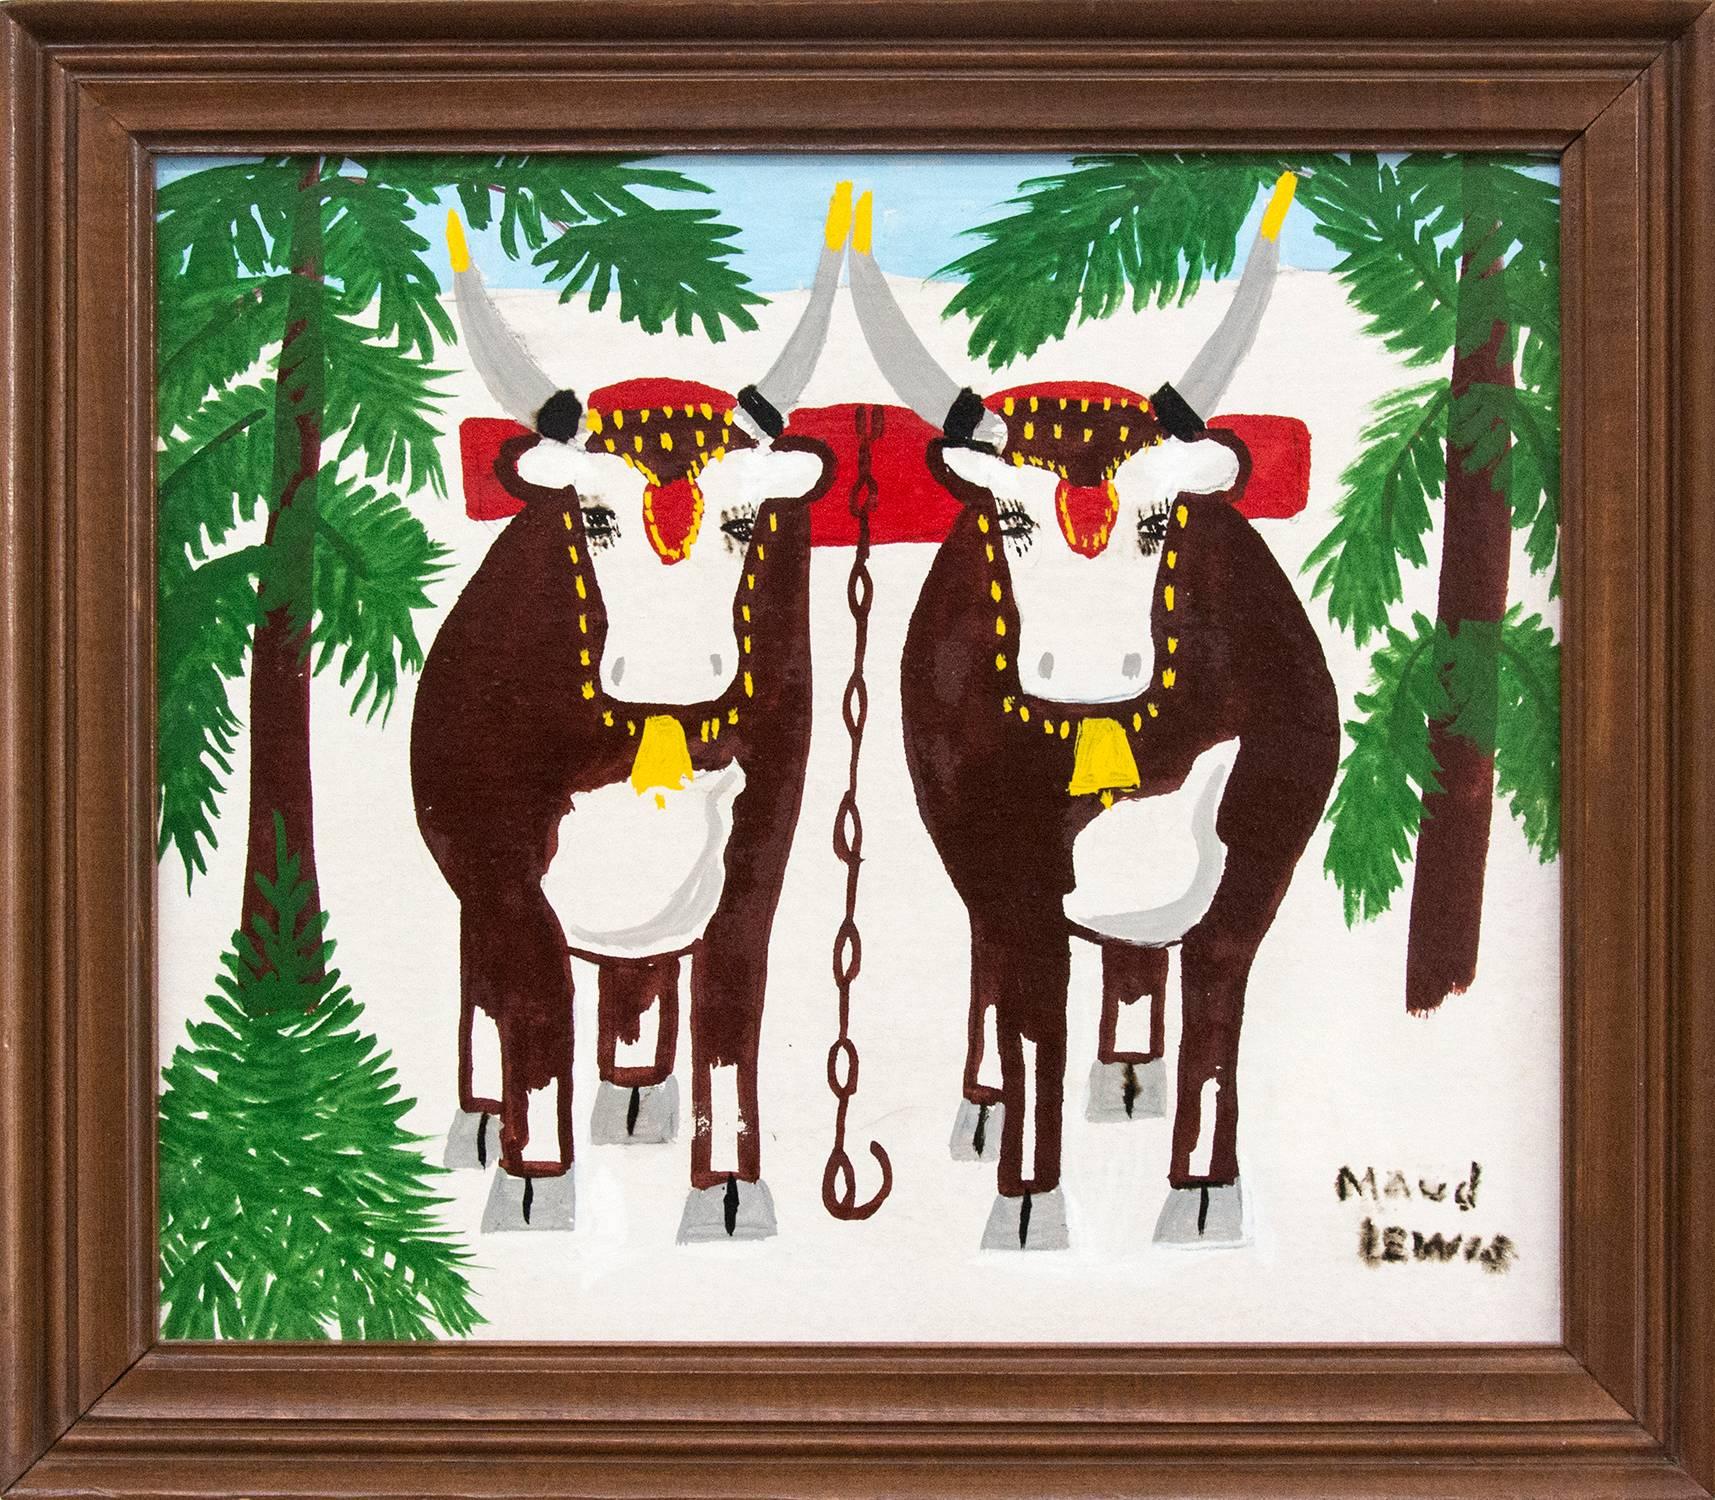 Pair of Oxen With Tree in Foreground - Painting by Maud Lewis